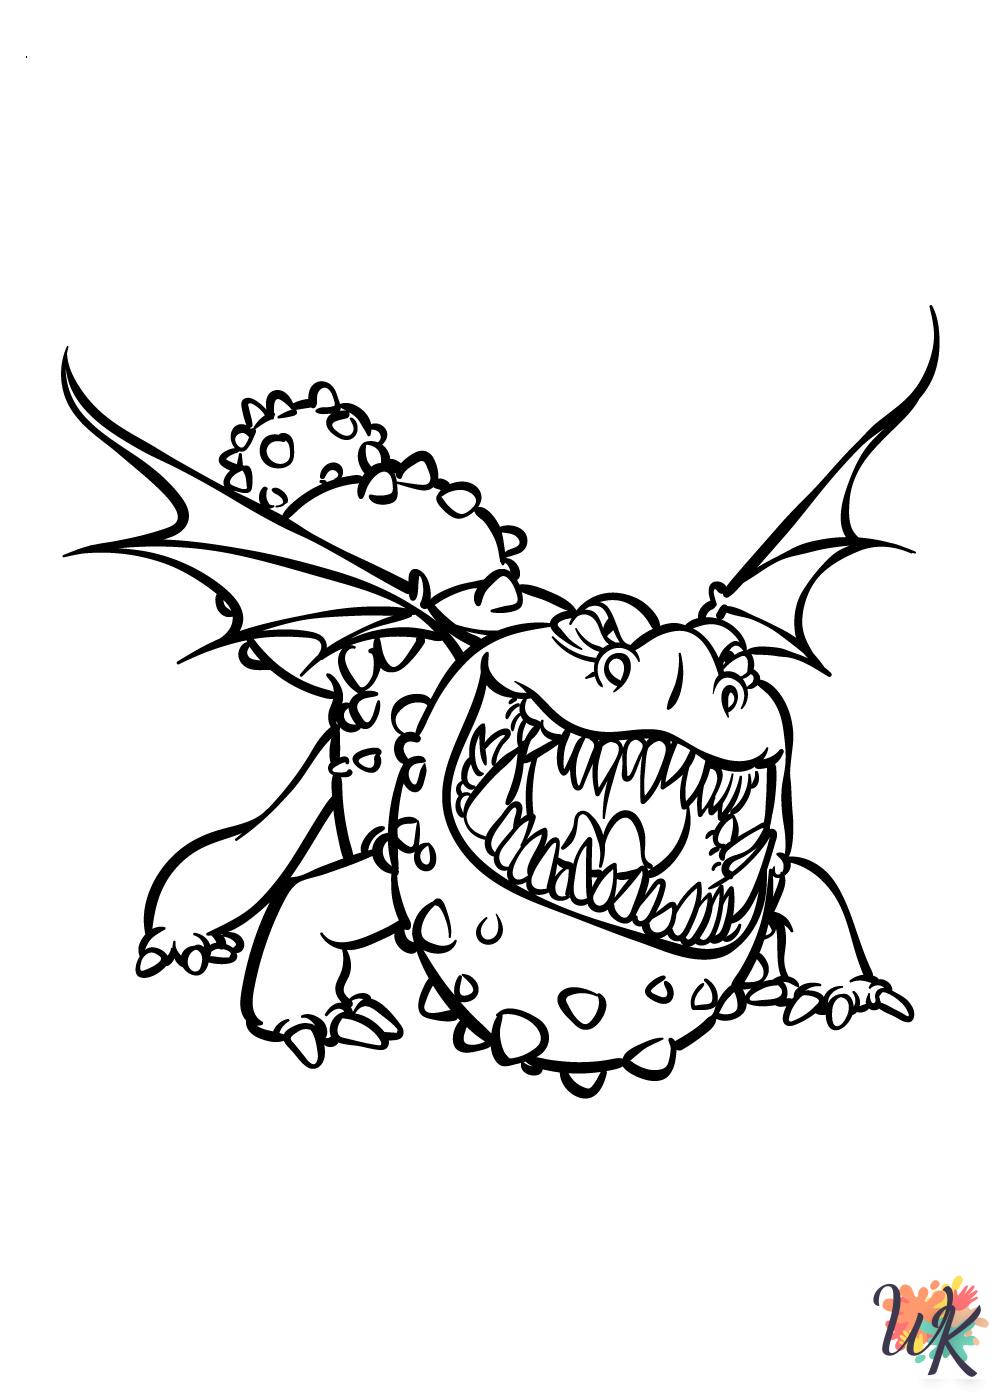 How To Train Your Dragon coloring pages for adults easy